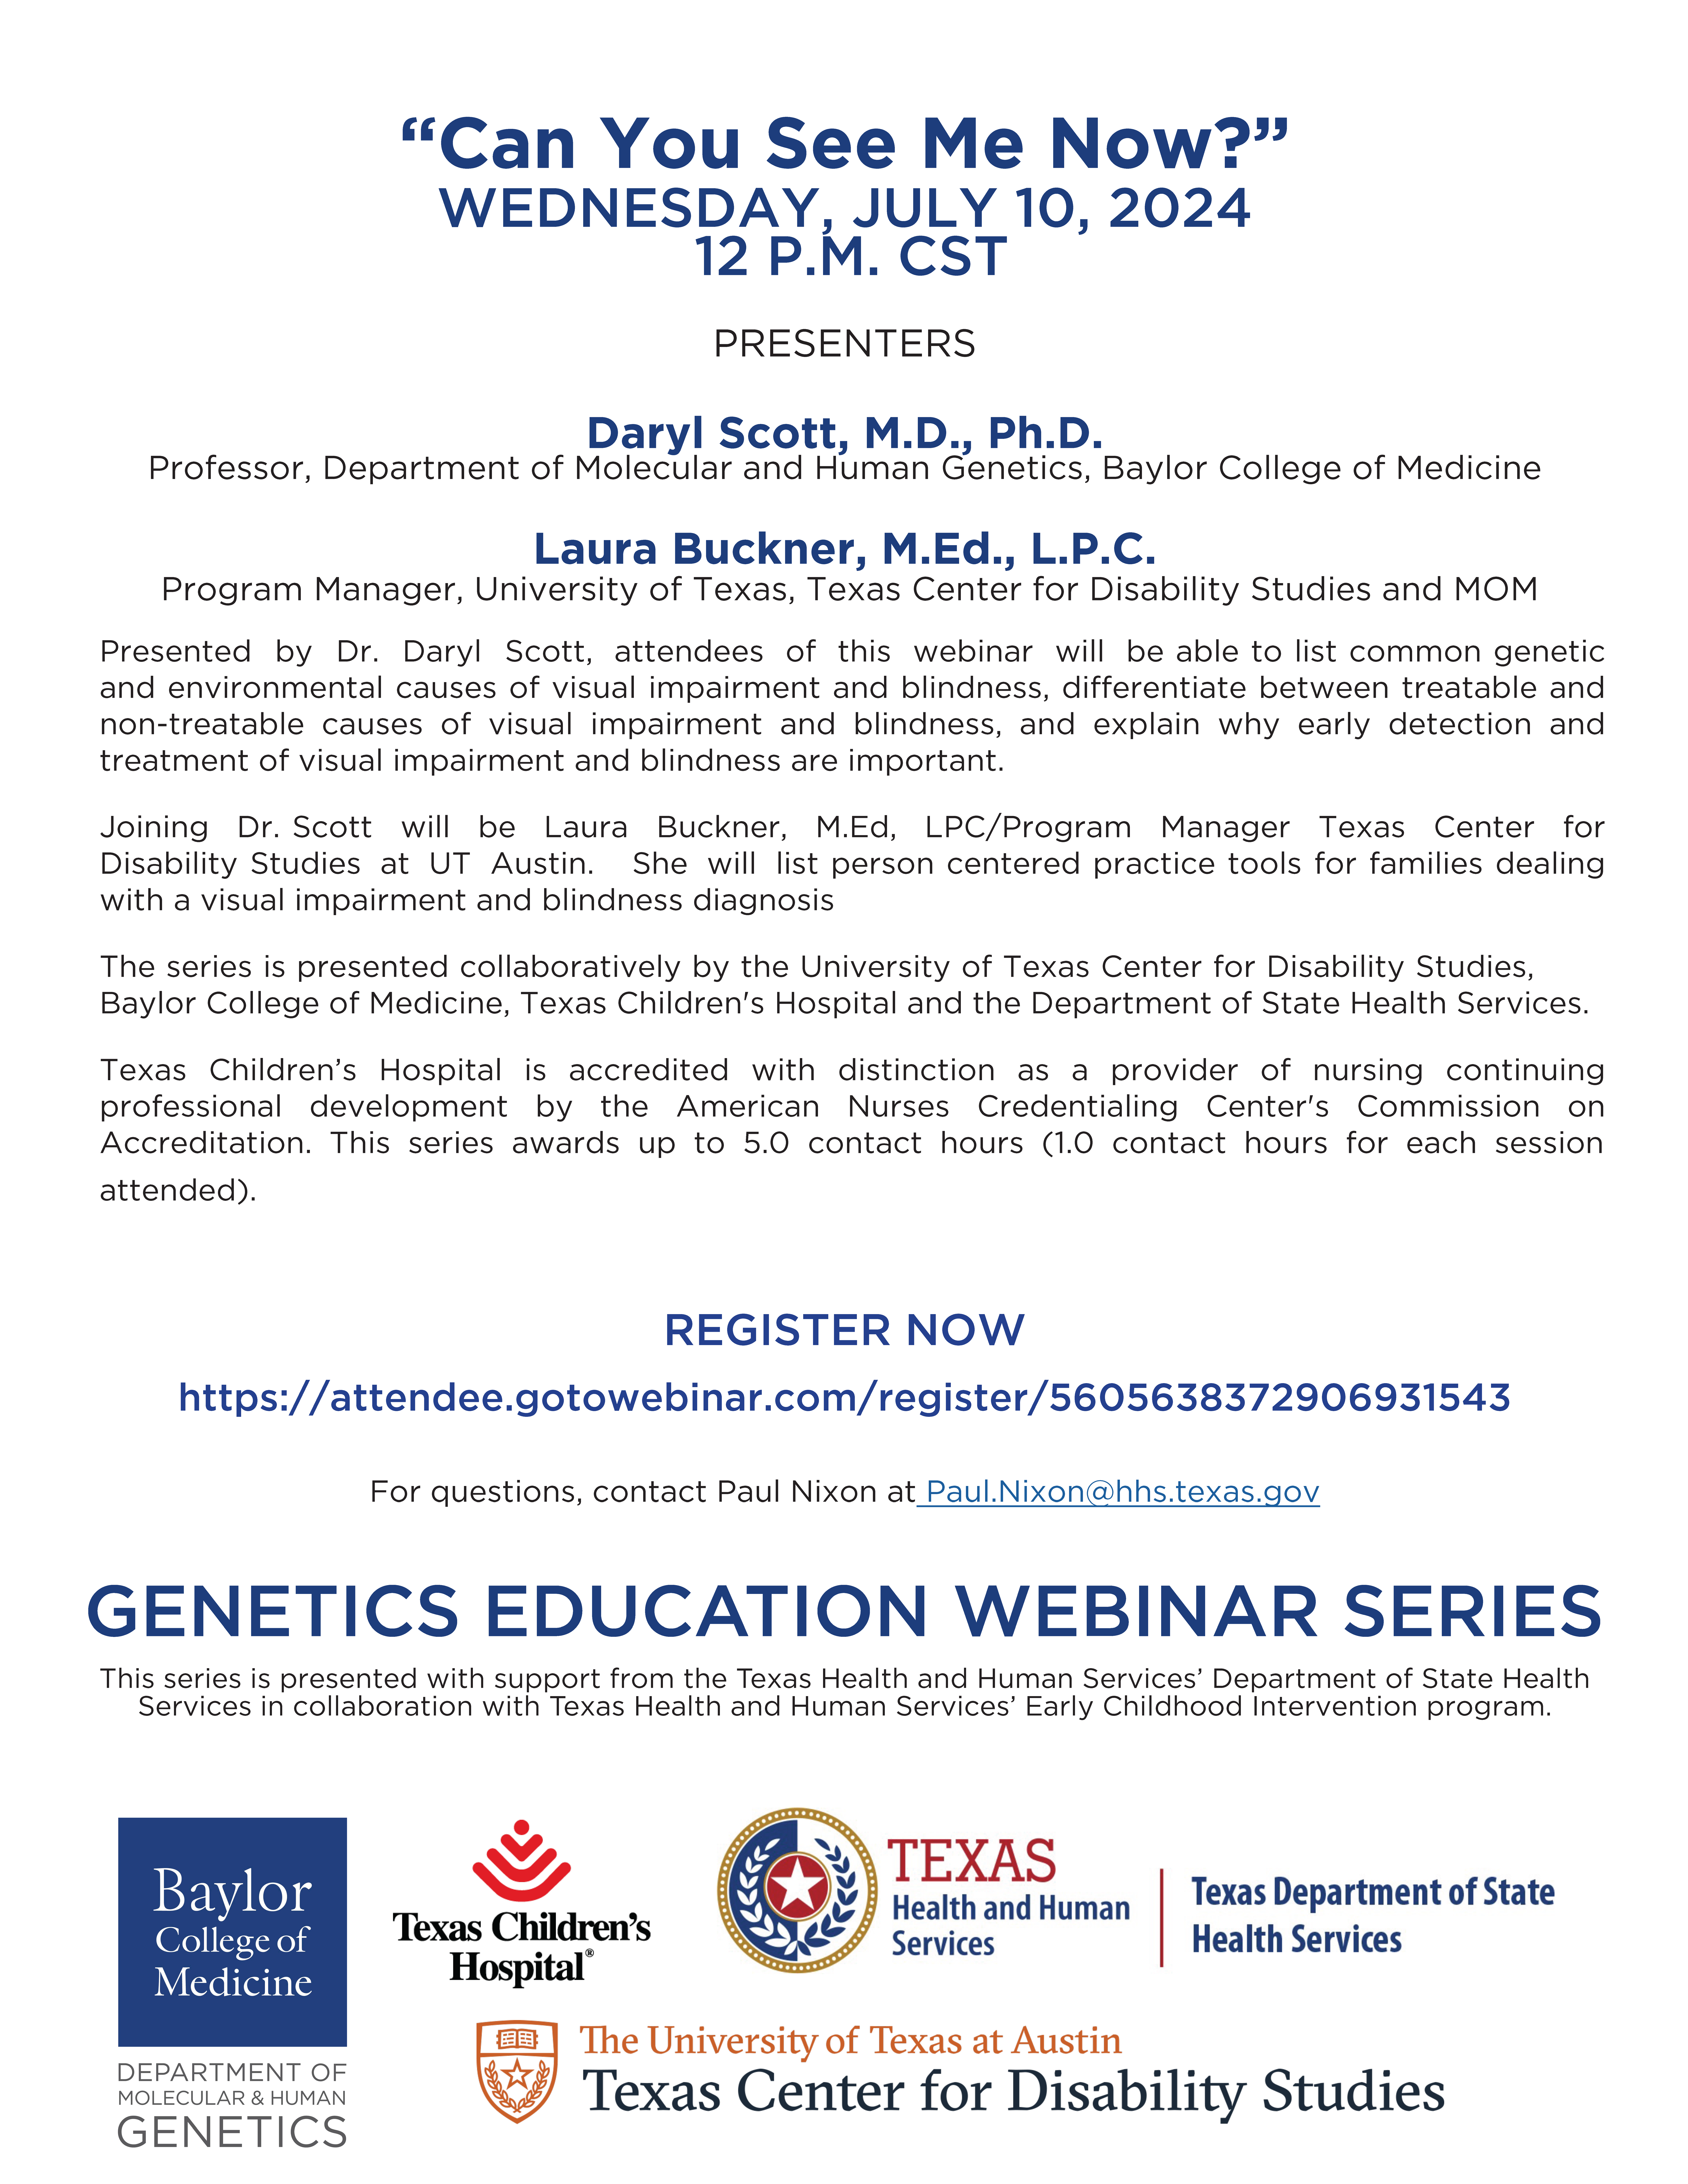 Flyer for Genetics Education Webinar, Entitles "Can you See Me Now?"; which will be held on Wednesday, July 10, 2024.